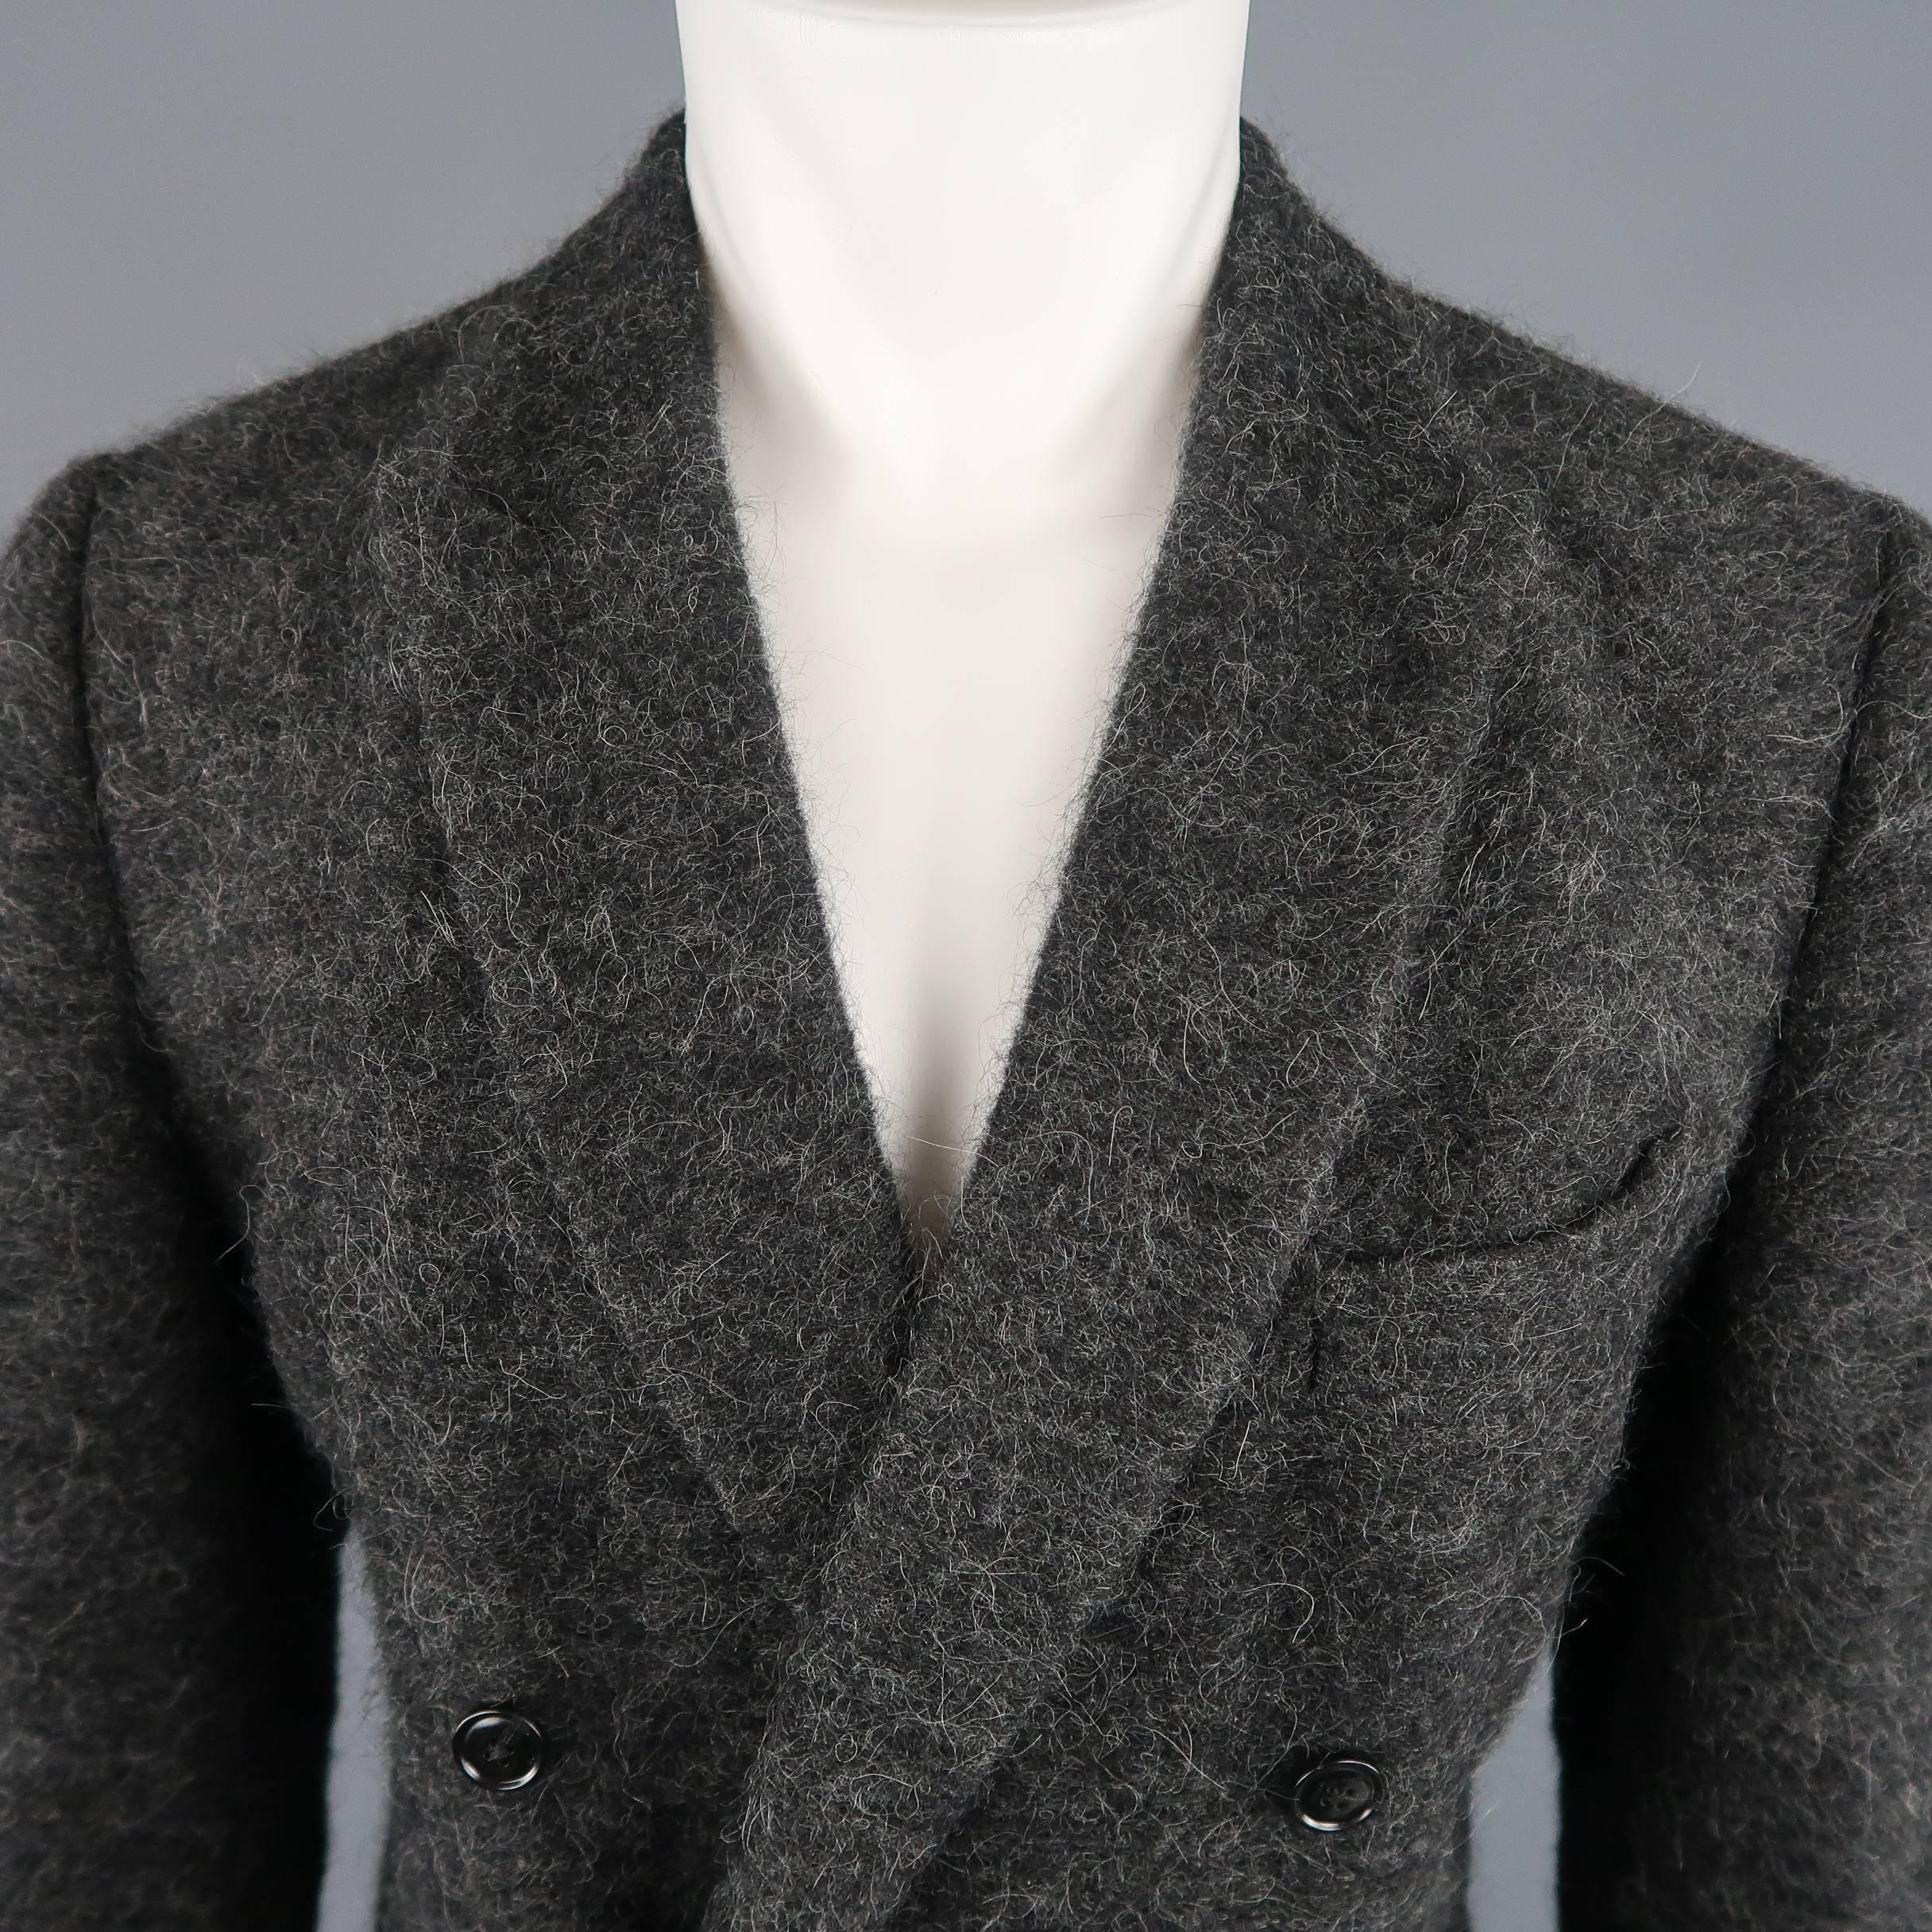 Double breasted DRIES VAN NOTEN sport coat comes in a fuzzy textured charcoal gray alpaca blend material with a peak lapel, flap pockets, and single vented back. Made in Morocco.
 
Excellent Pre-Owned Condition.
Marked: IT 52
 
Measurements:
